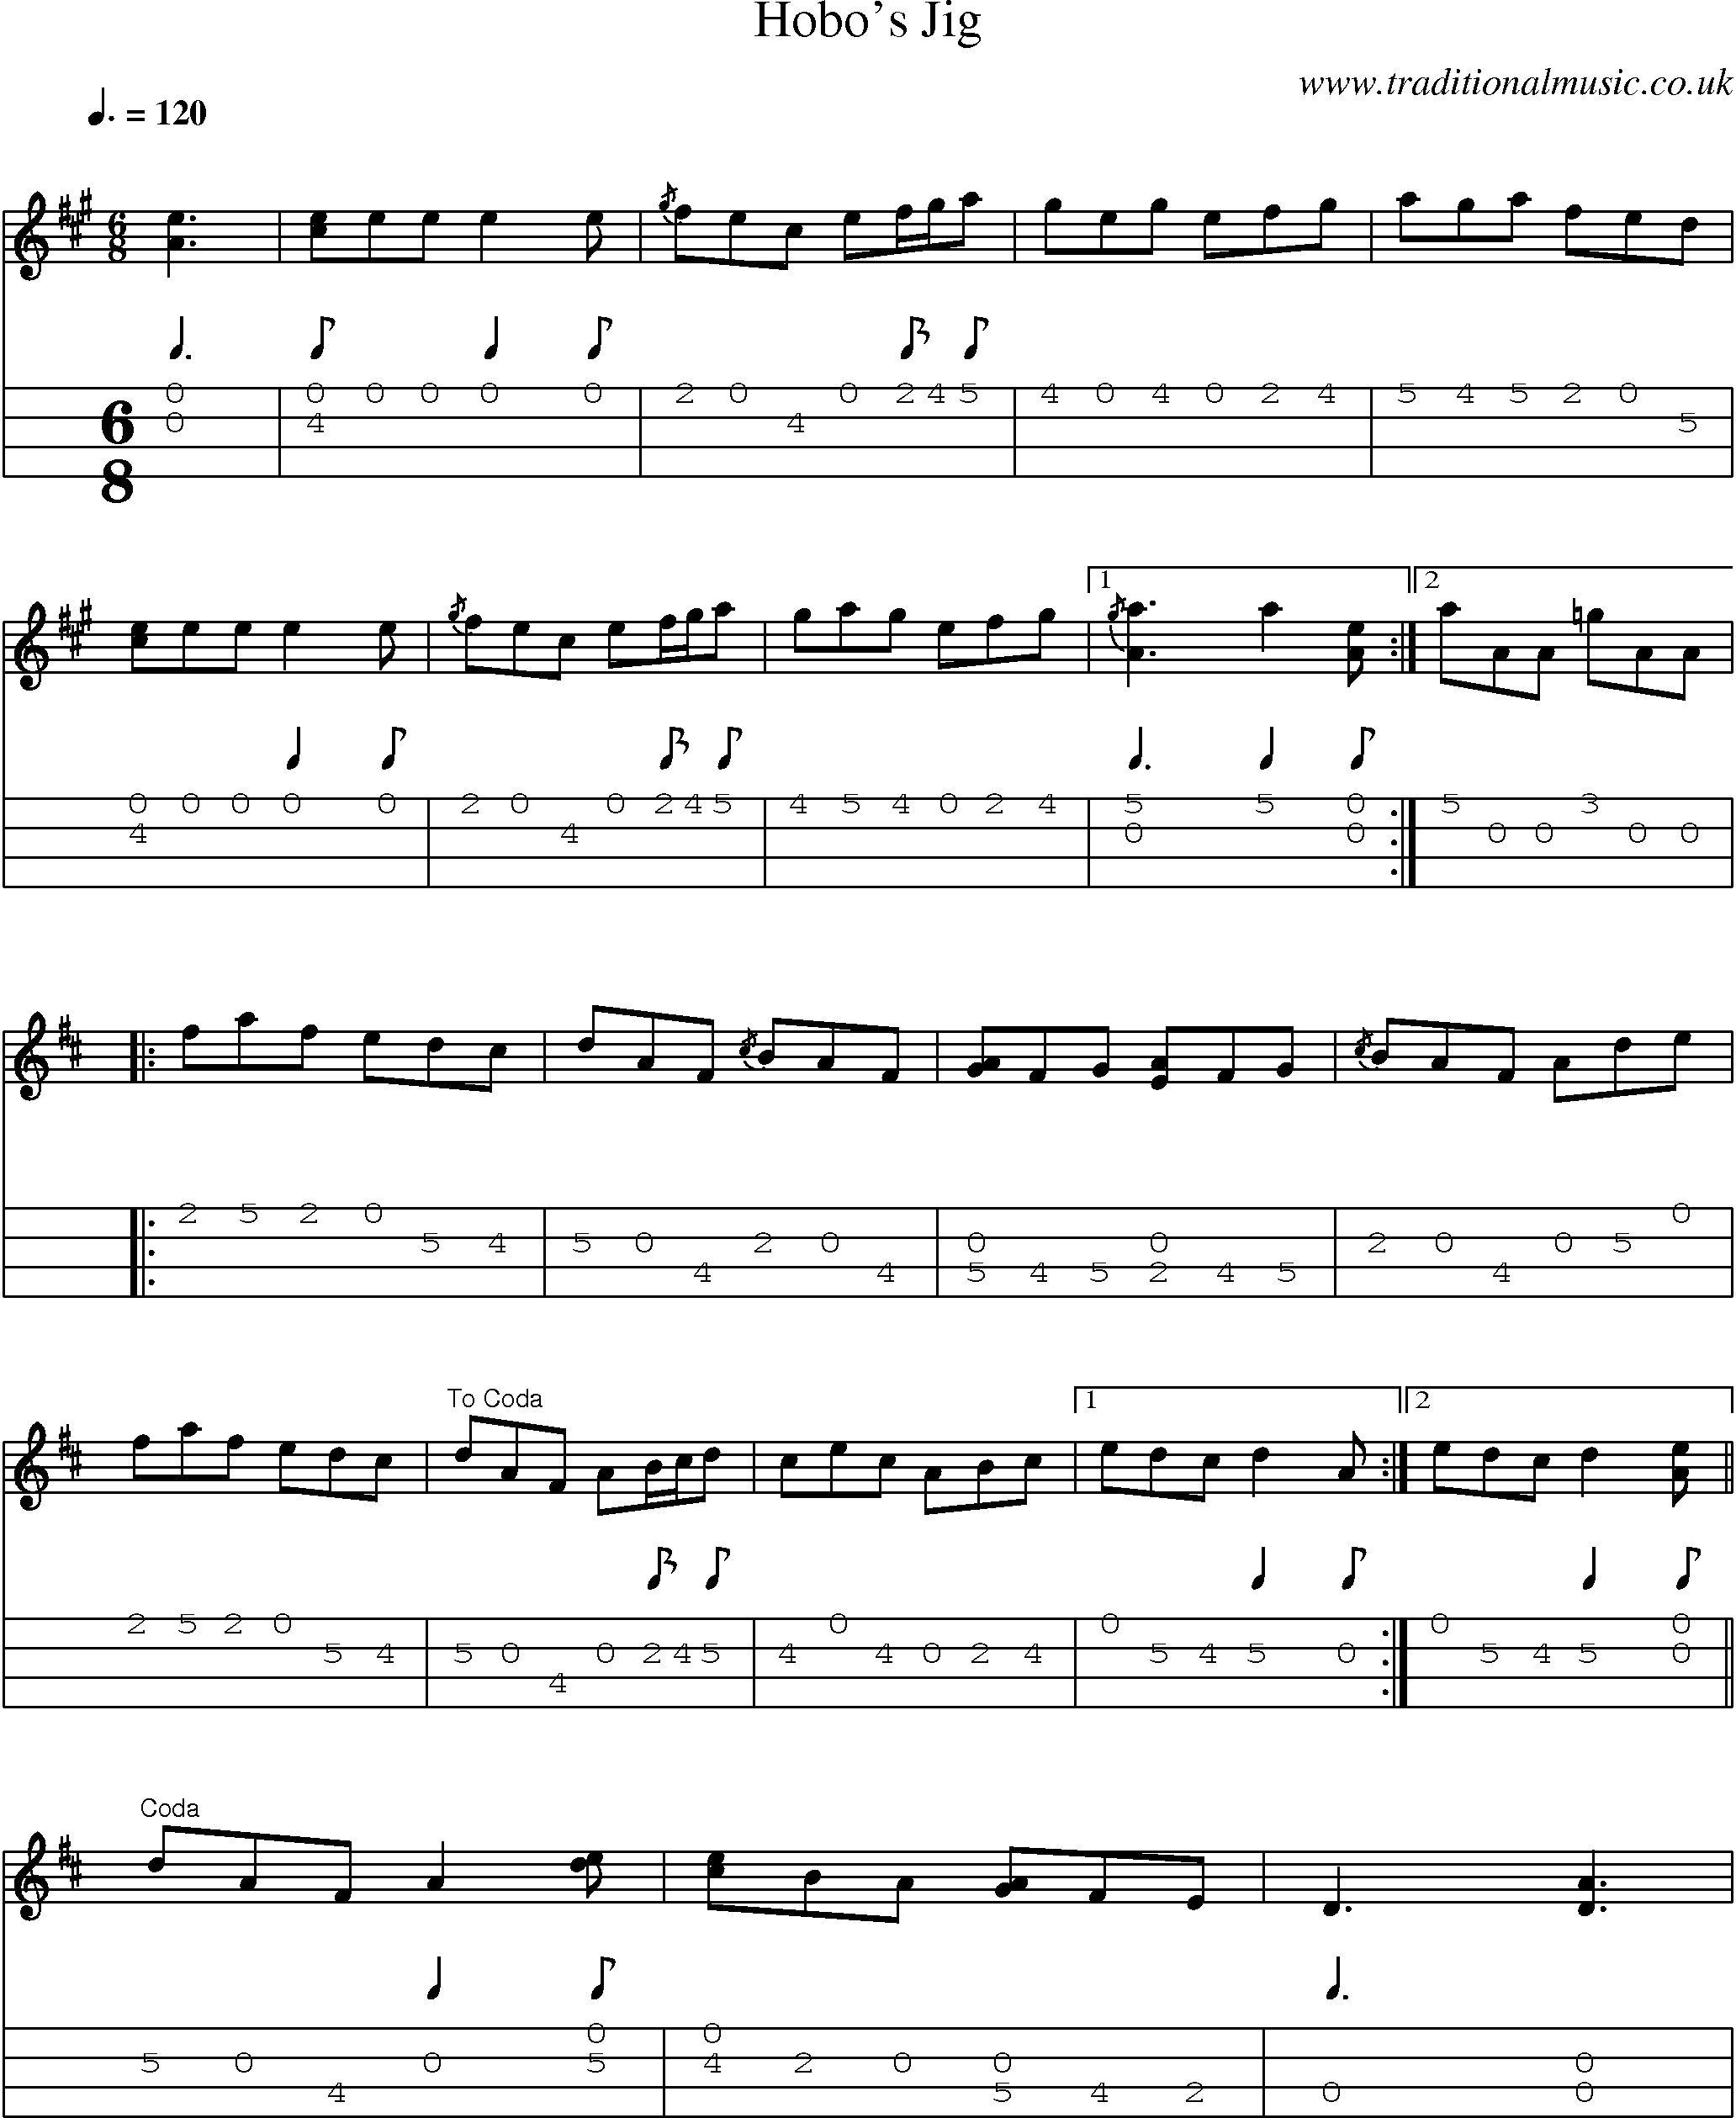 Music Score and Mandolin Tabs for Hobos Jig